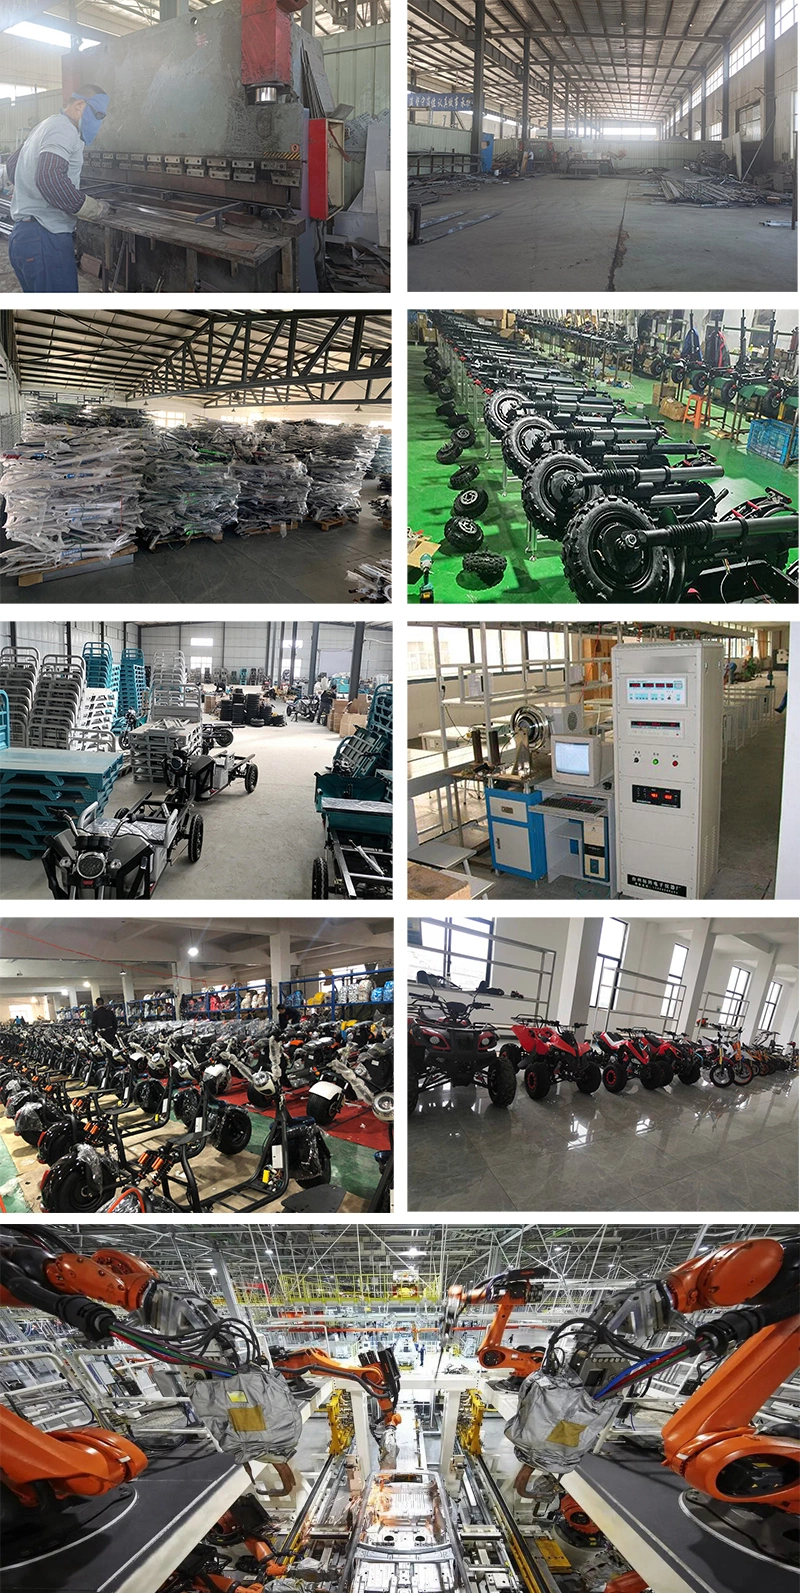 Motorcycle for Scooter Bike Kids Adult Motor 8000W Wheel 5000W Battery Kit Conversion Kits 3 Cheap One Hub Electric Motorcycles